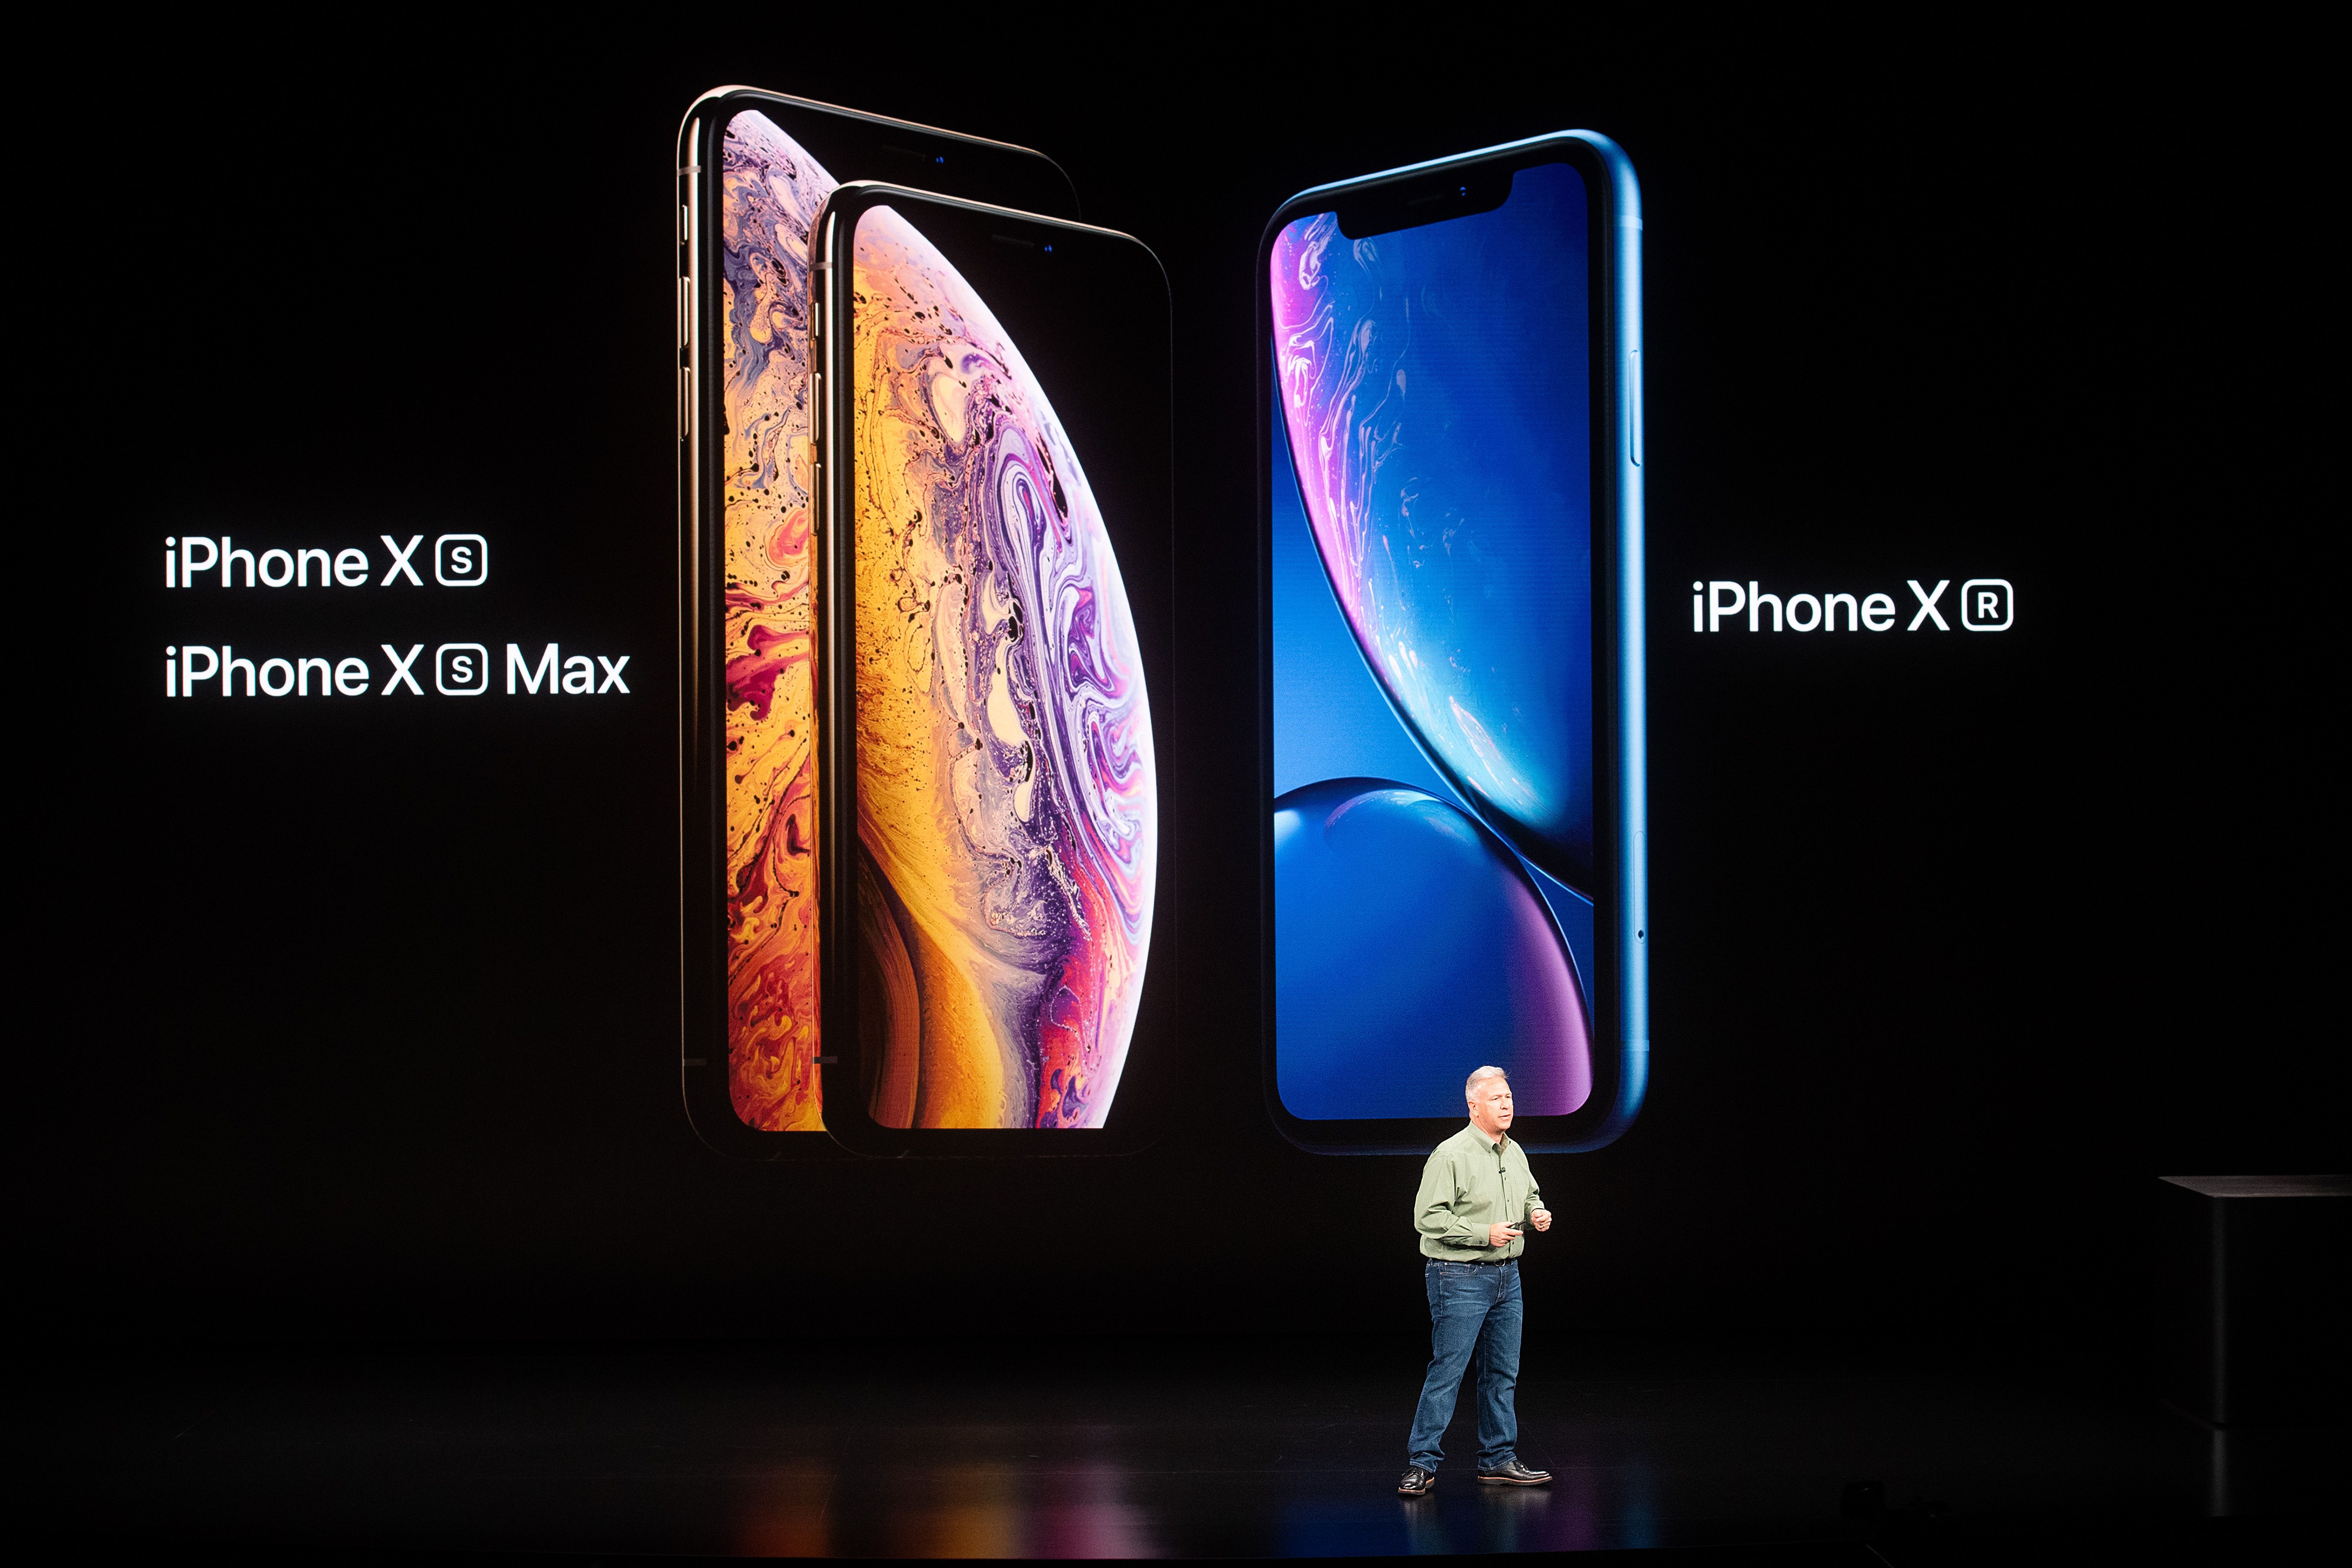 New iPhones set to be unveiled Wednesday offer Apple a chance for fresh momentum in a sputtering smartphone market as the California tech giant moves into new products and services to diversify. NOAH BERGER/AFP/Getty Images